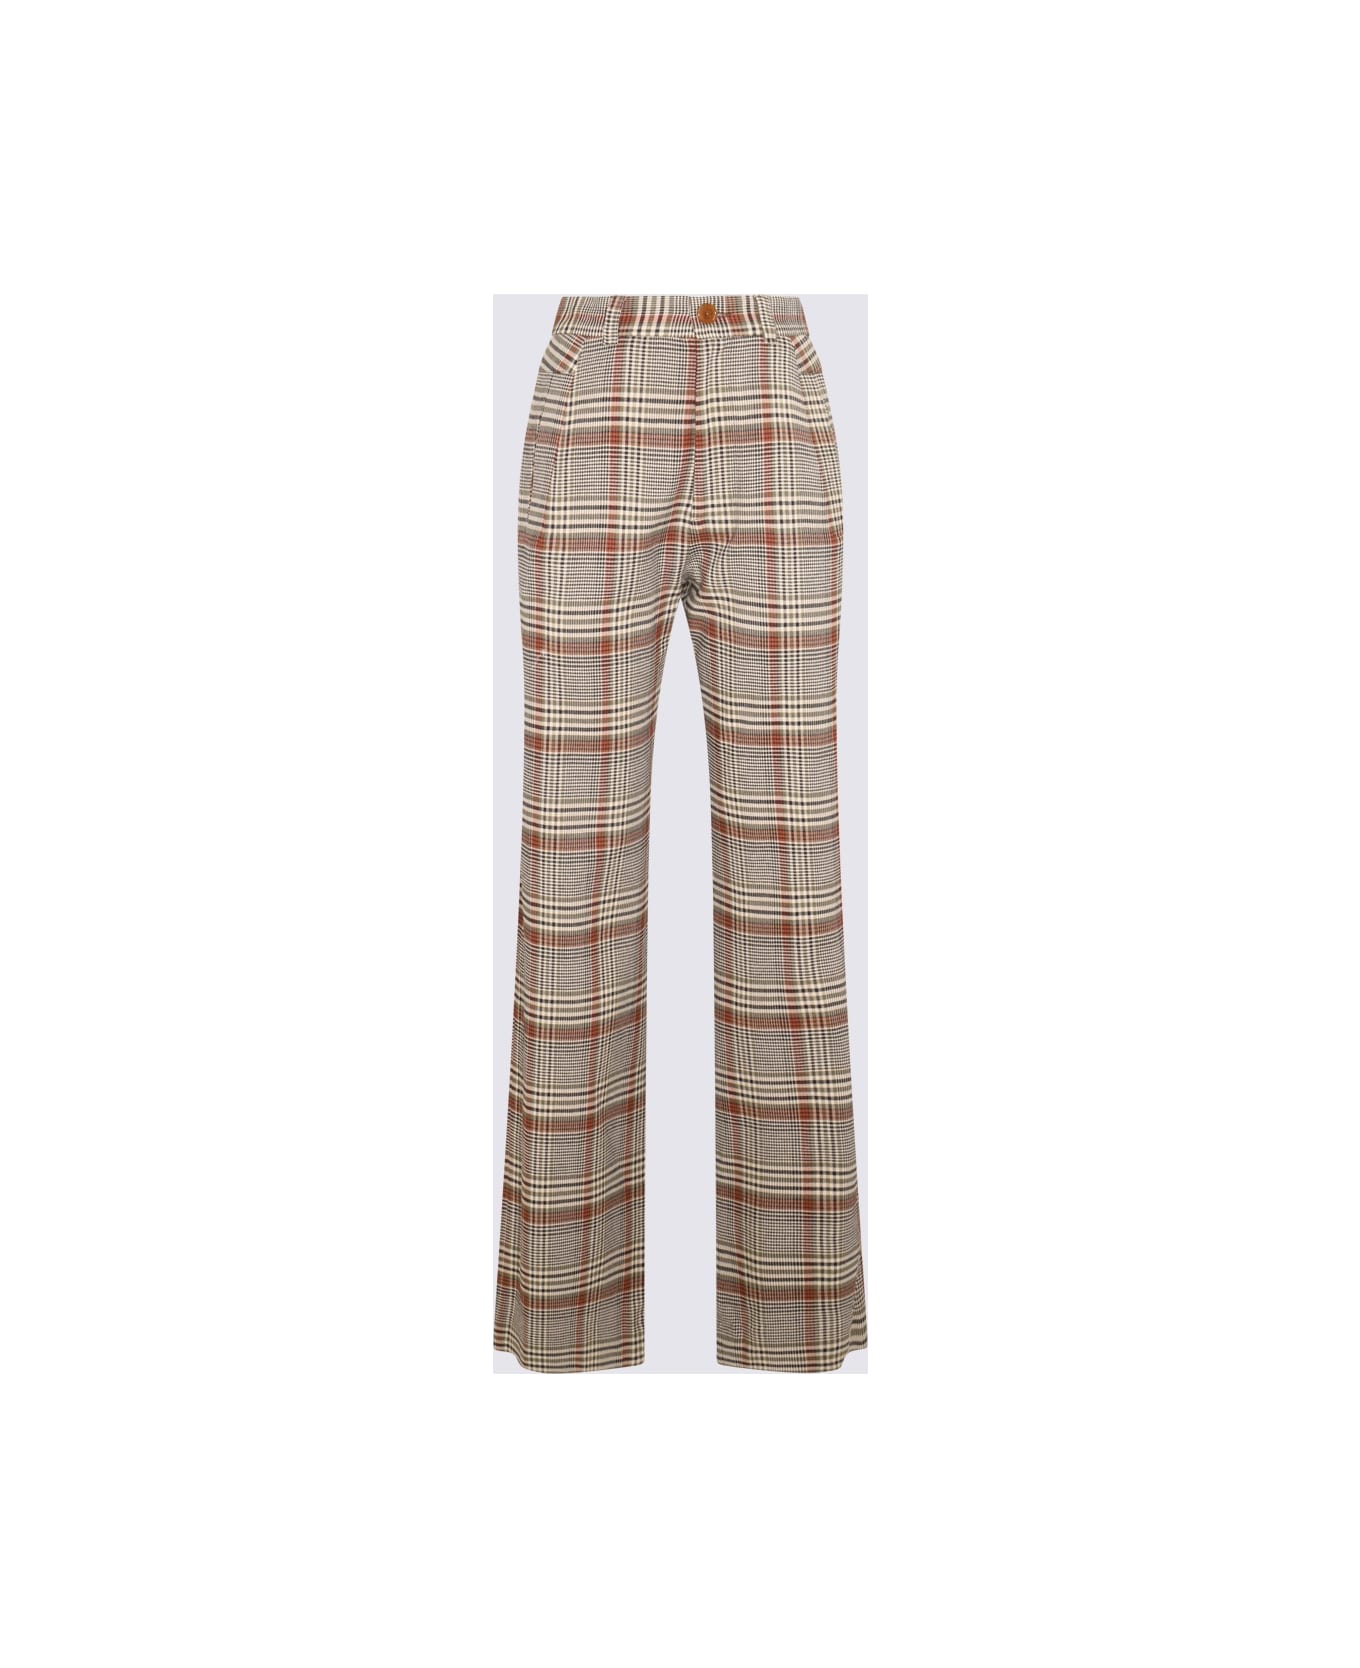 Vivienne Westwood Brown Multicolour Viscose-wool Blend Trousers - Green ボトムス